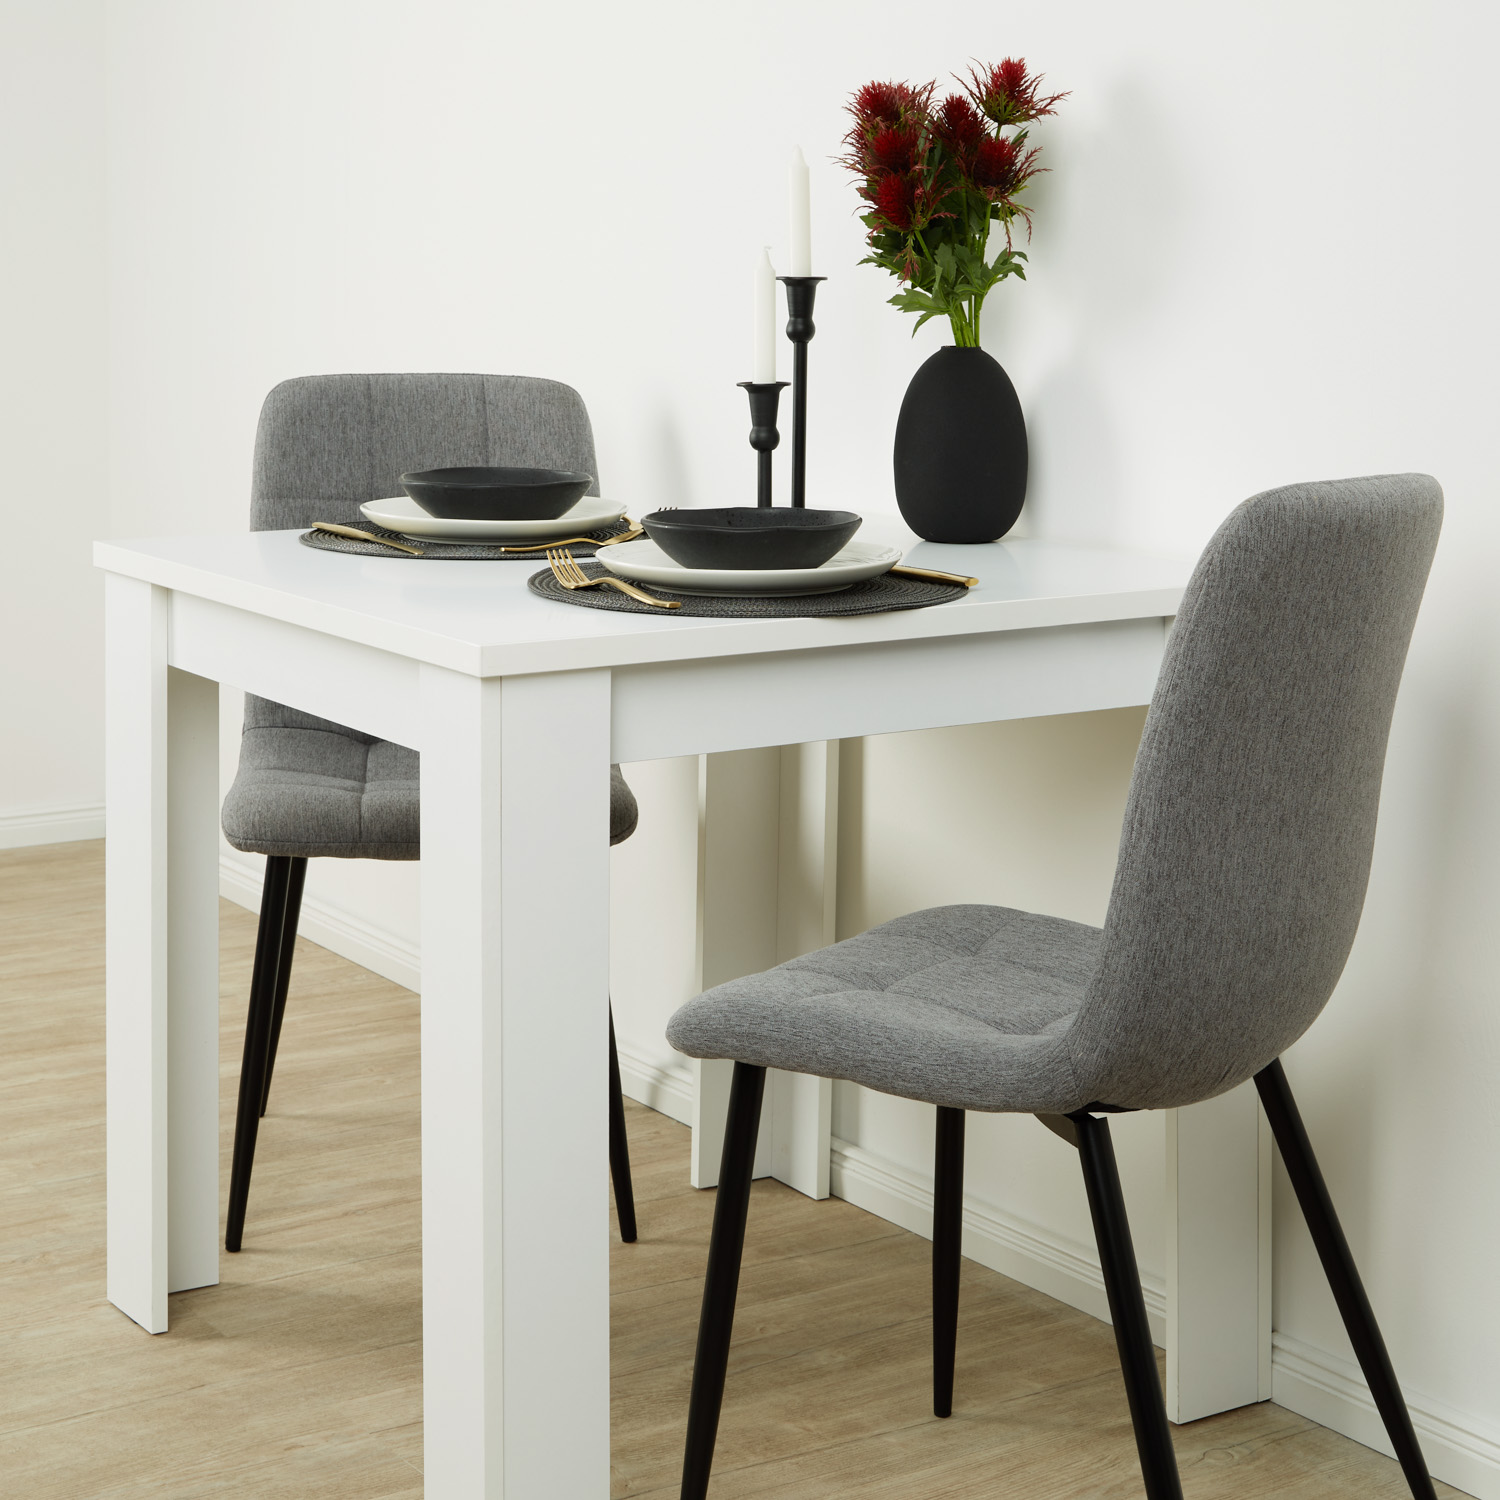 Modern Dining Table White 80x80 cm with 2 Grey Linen Chairs Dining Room Table Wooden Table